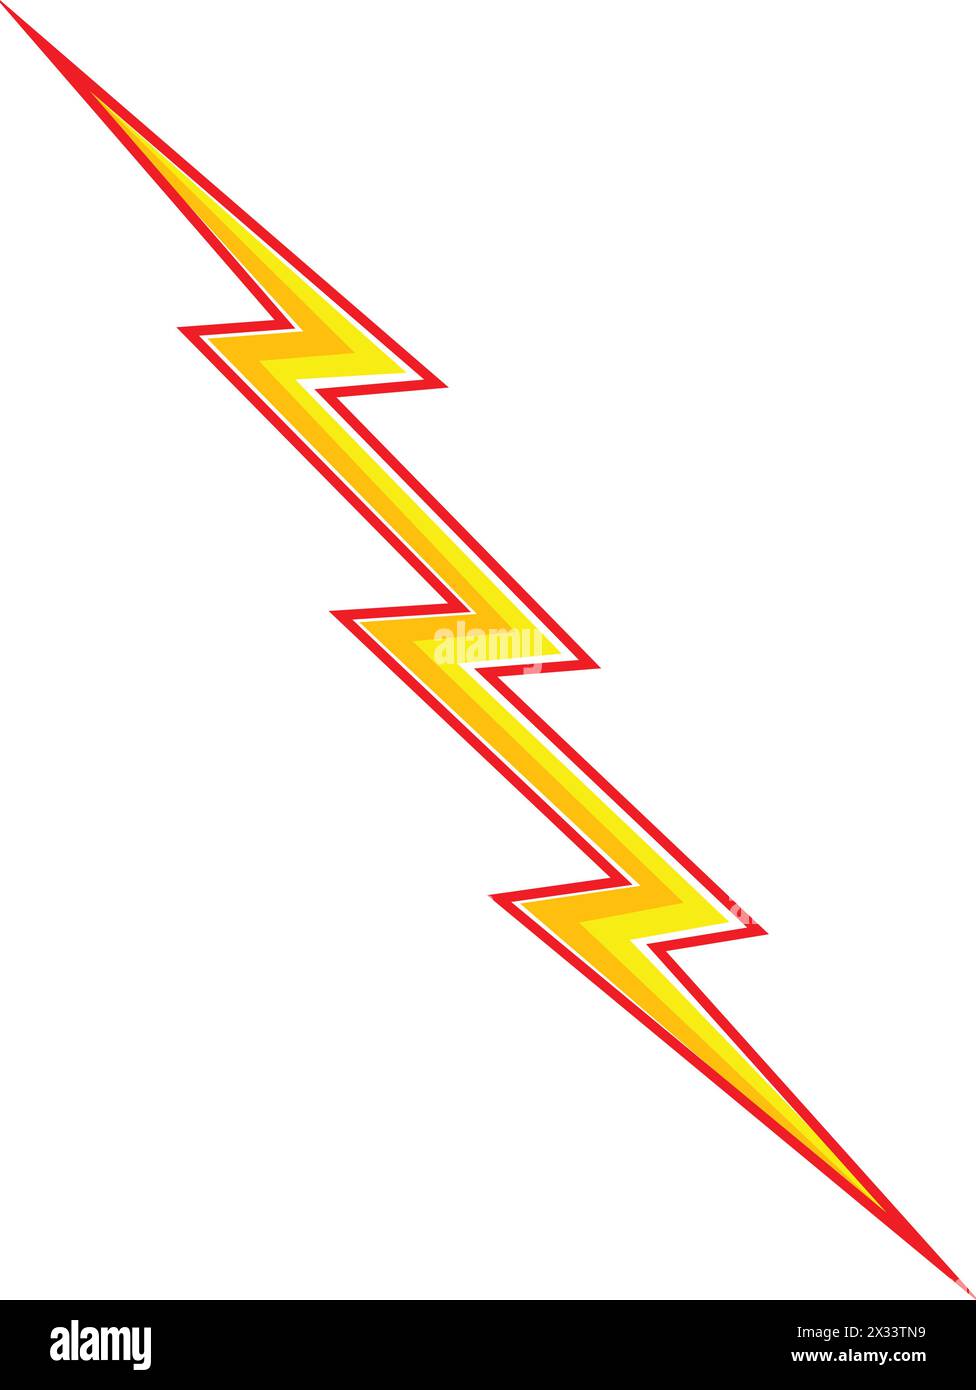 simple classic cartoon yellow lightning bolt illustration vector isolated on transparent background Stock Vector